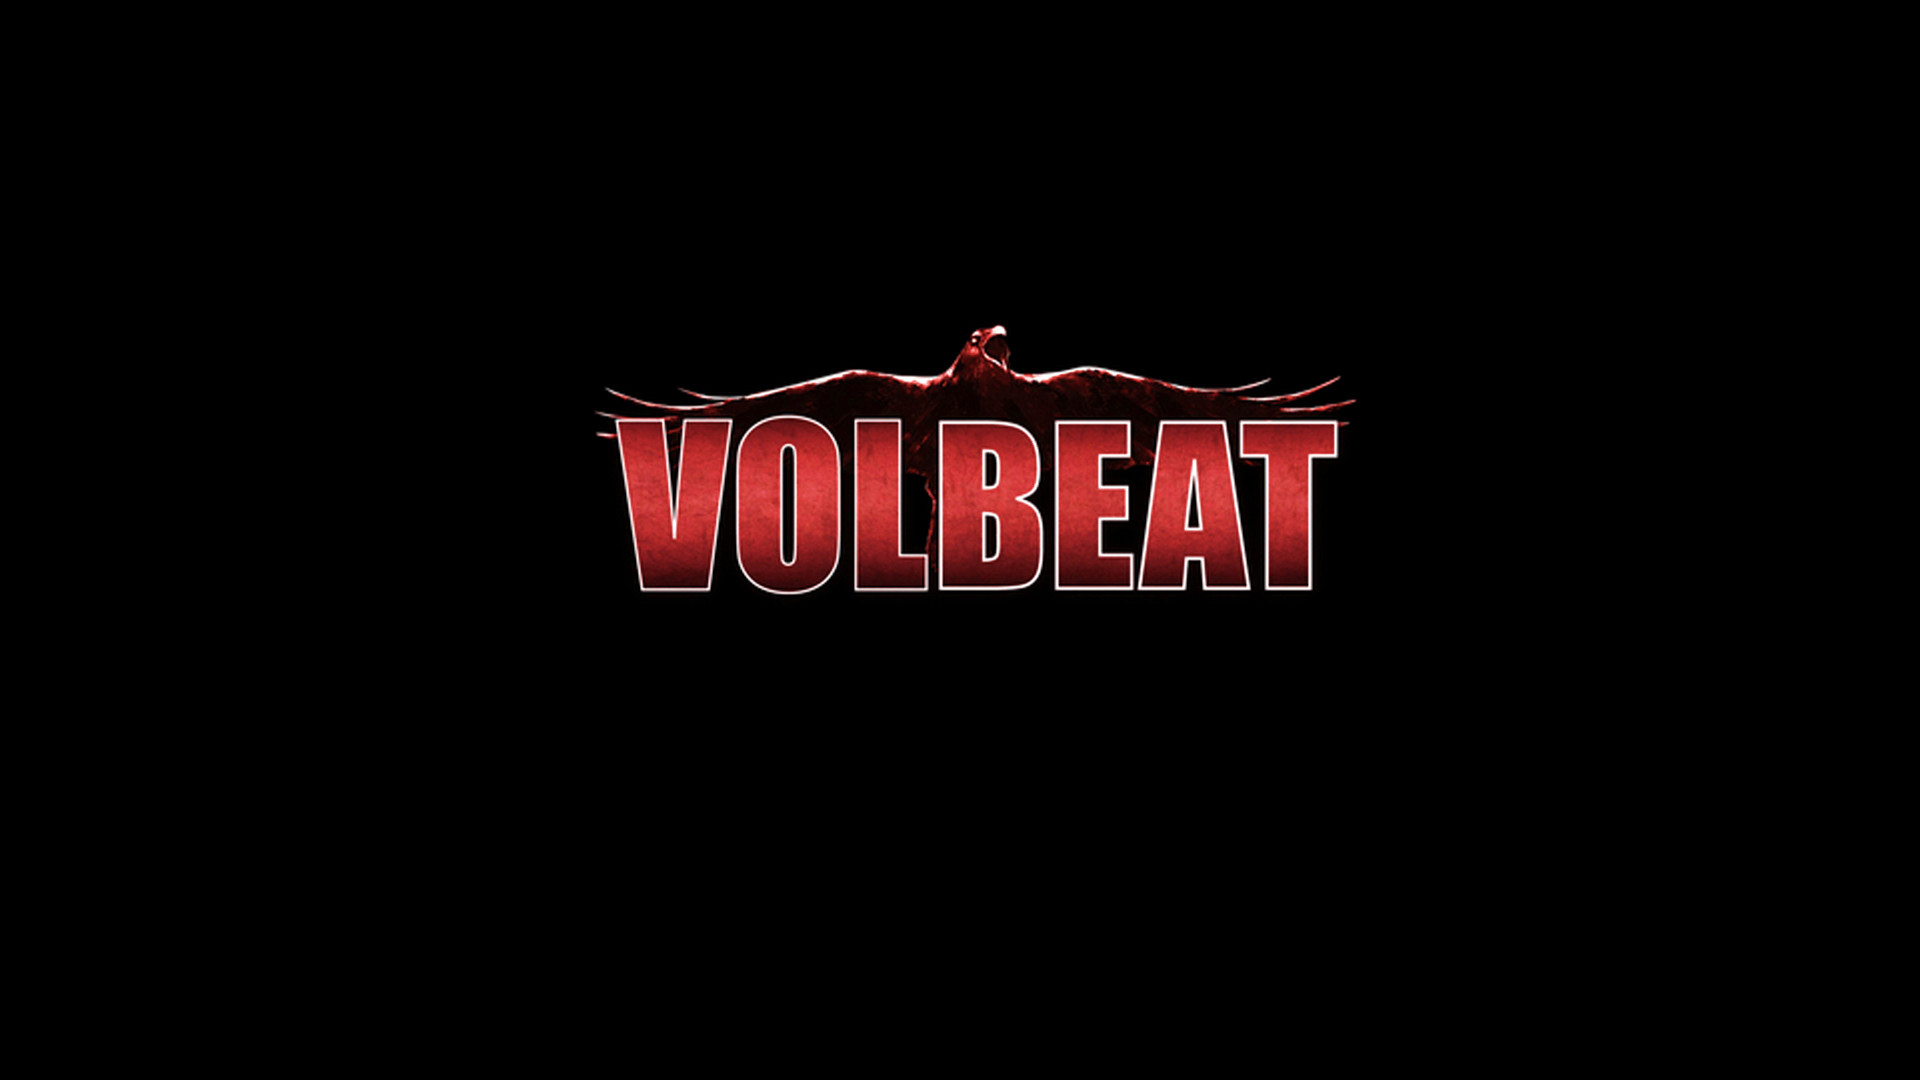 1920x1080 Volbeat Eagle Wallpaper by MetalSlasher Volbeat Eagle Wallpaper by  MetalSlasher